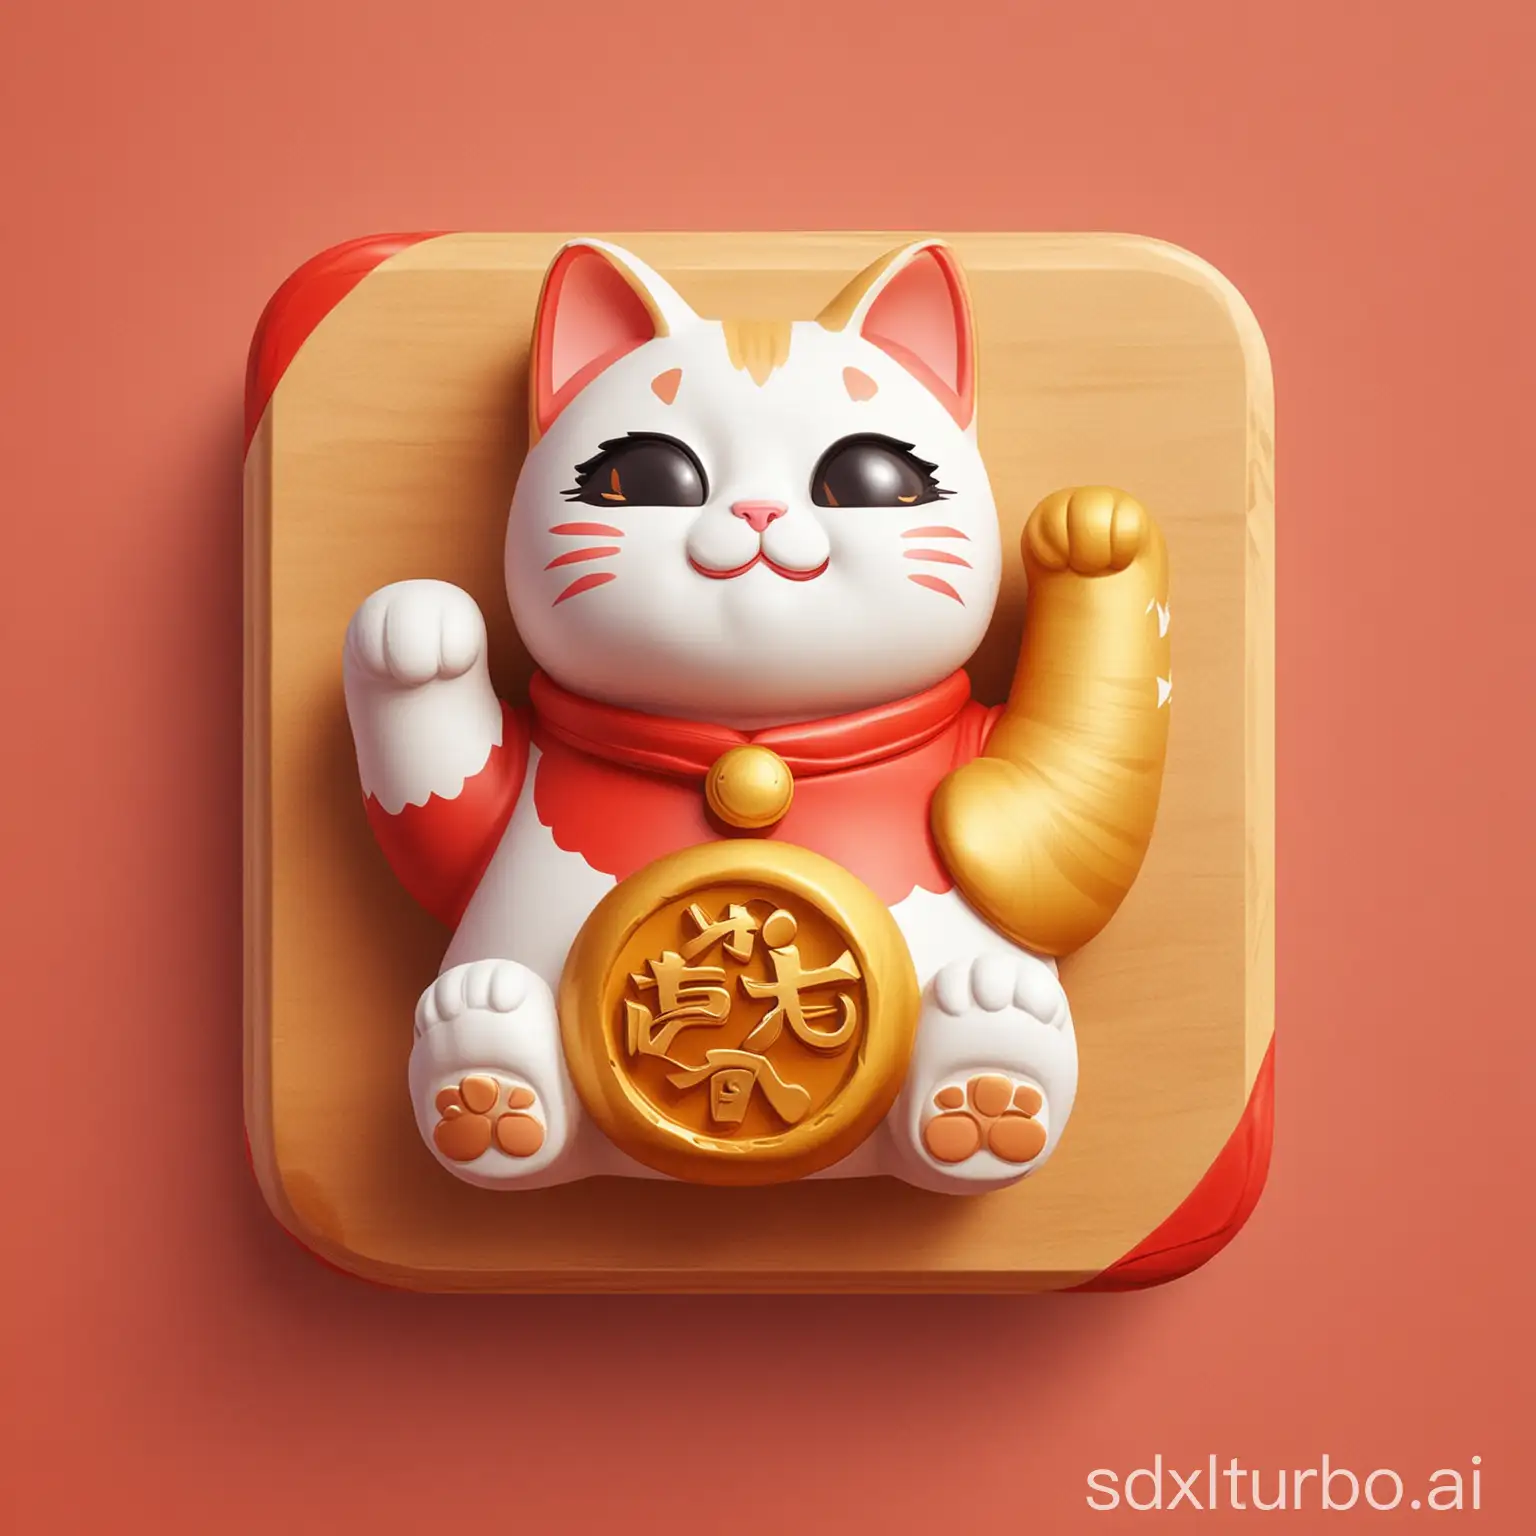 Create an app icon related to the lucky cat, with dimensions of 1024*1024, with more cartoon elements, fill the entire image, and avoid any blank spaces.